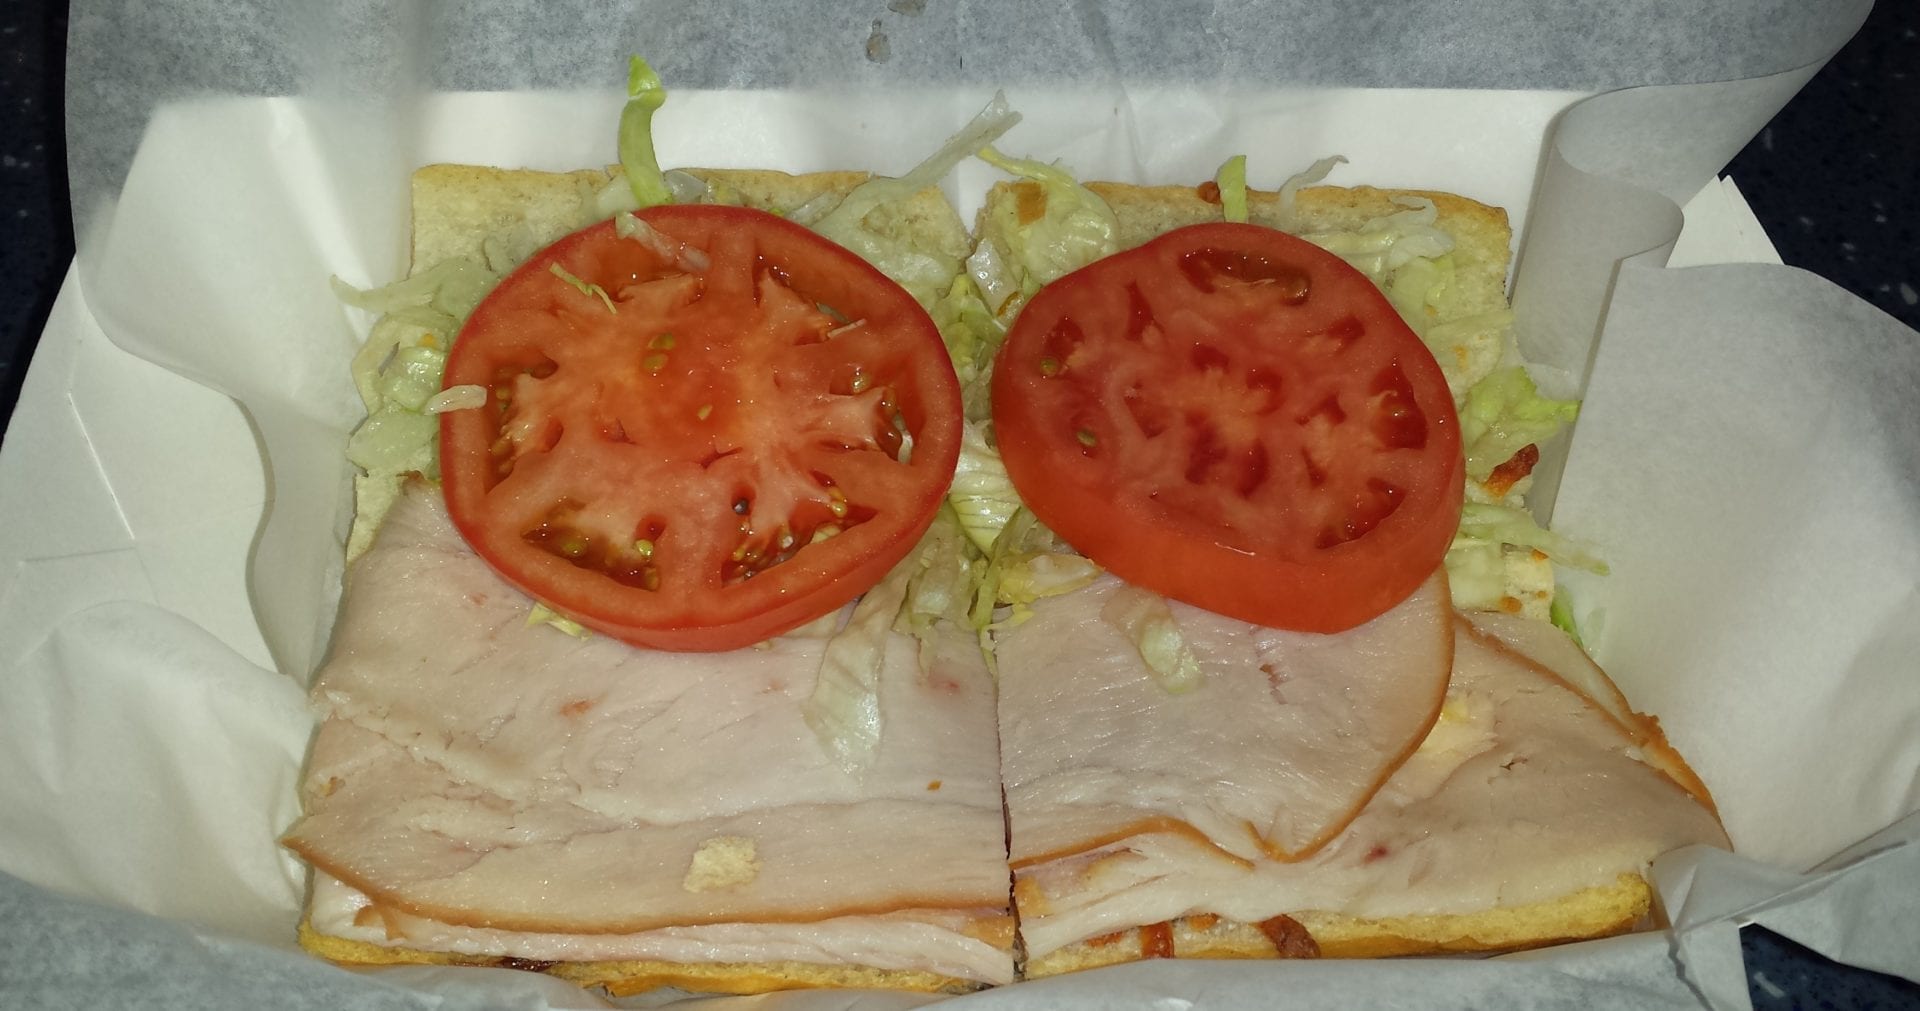 A sandwich cut in half with tomatoes on top.